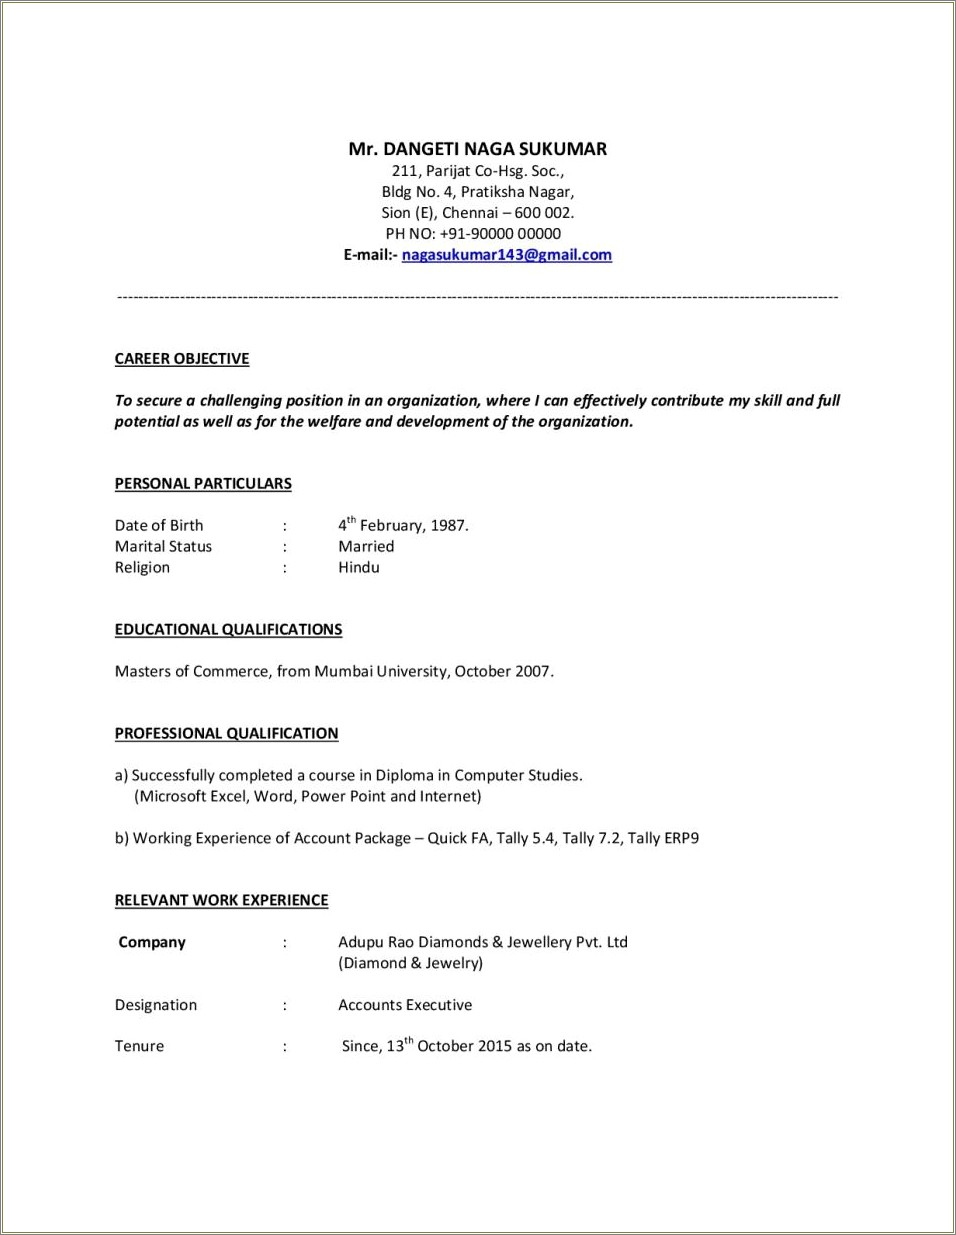 Sample Resume For Sales Executive Fresher